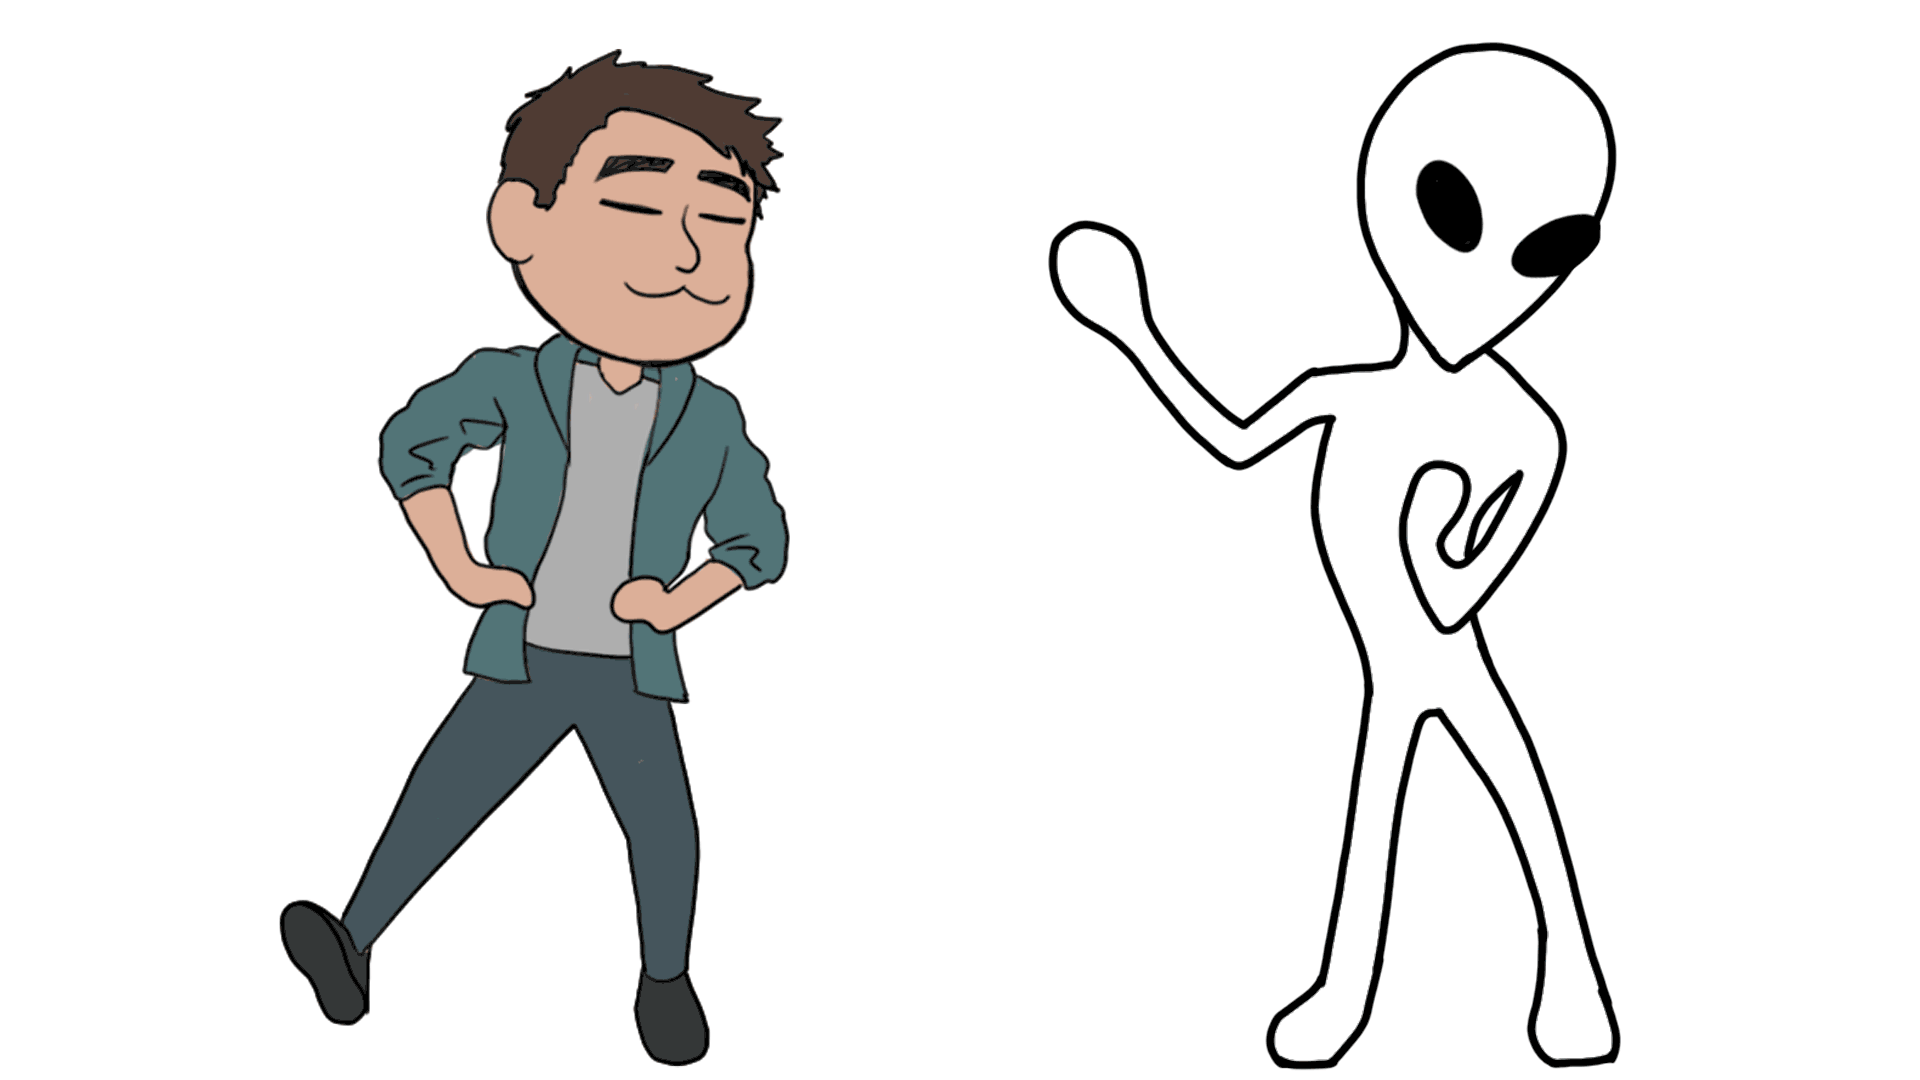 Dance animations of my personal avatar on the left and an alien on the right.